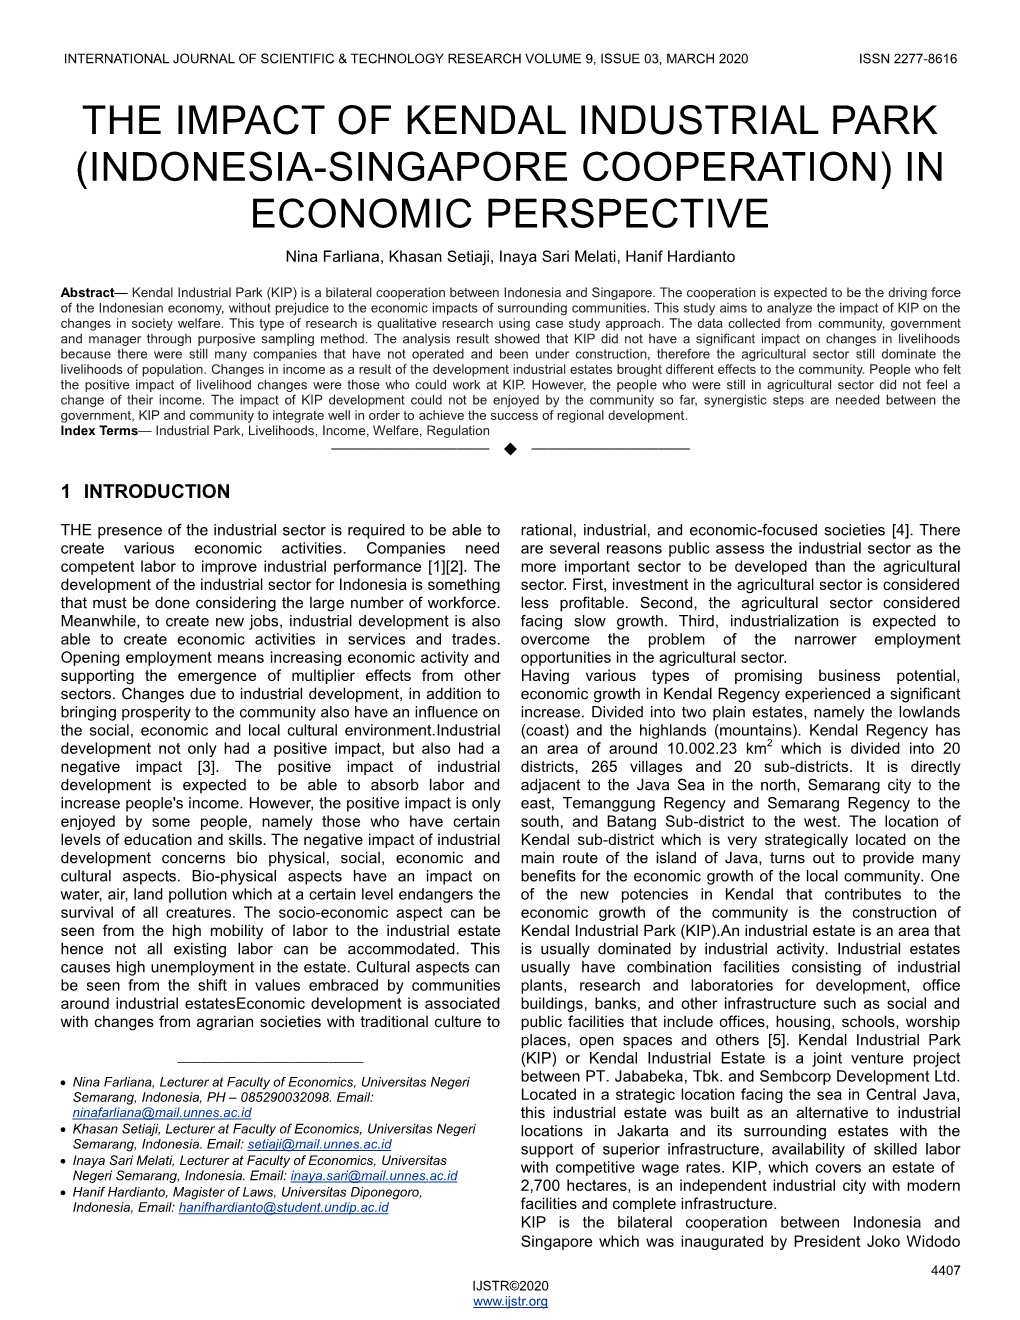 The Impact of Kendal Industrial Park (Indonesia-Singapore Cooperation) In